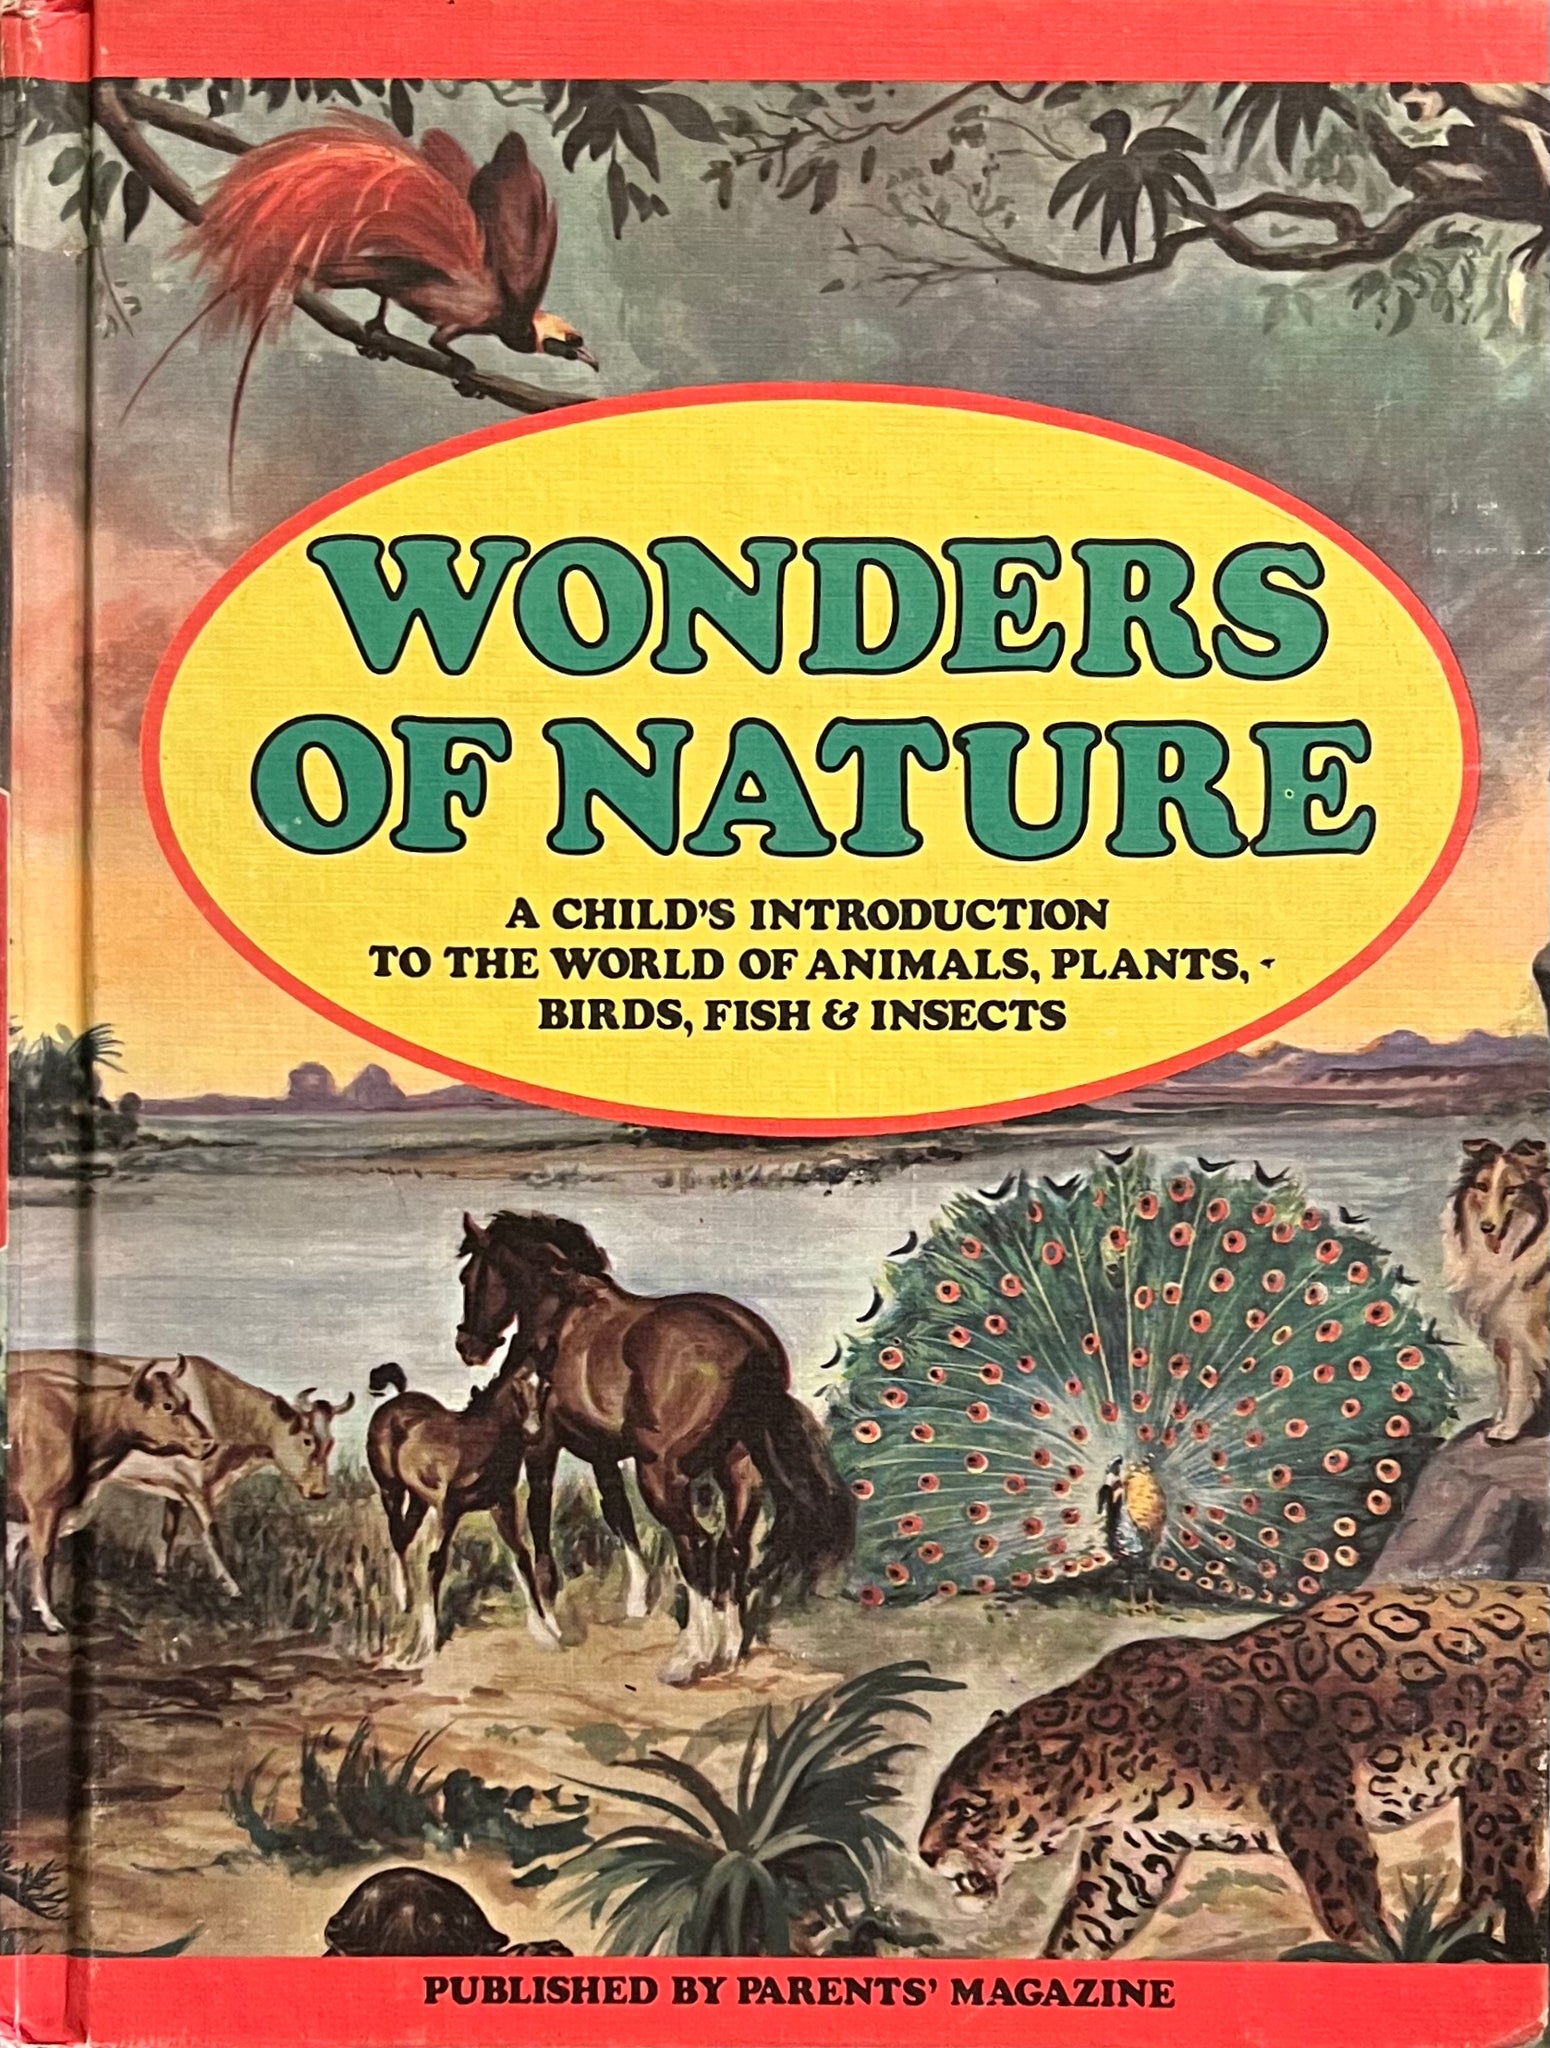 Wonders of Nature: A Child’s Introduction to the World of Animals, Plants, Birds, Fish and Insects